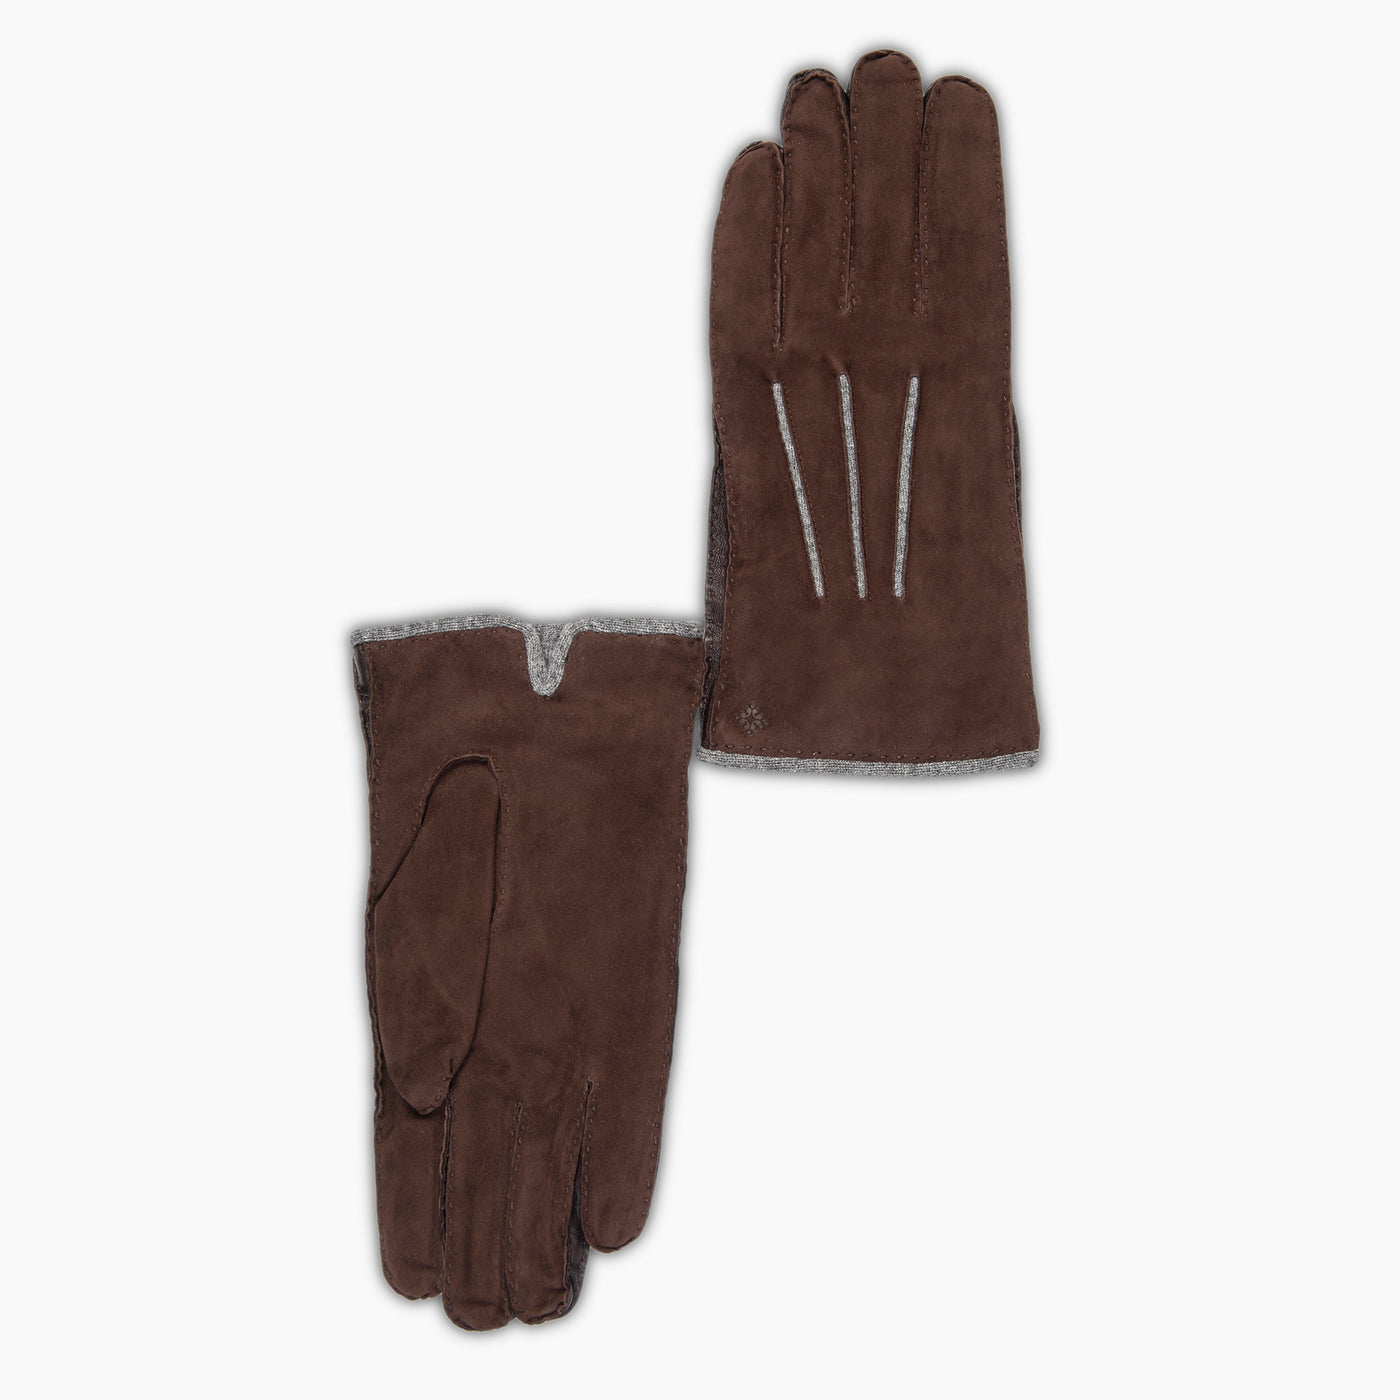 Eloy Suede Gloves with Nappa details and cashmere interior